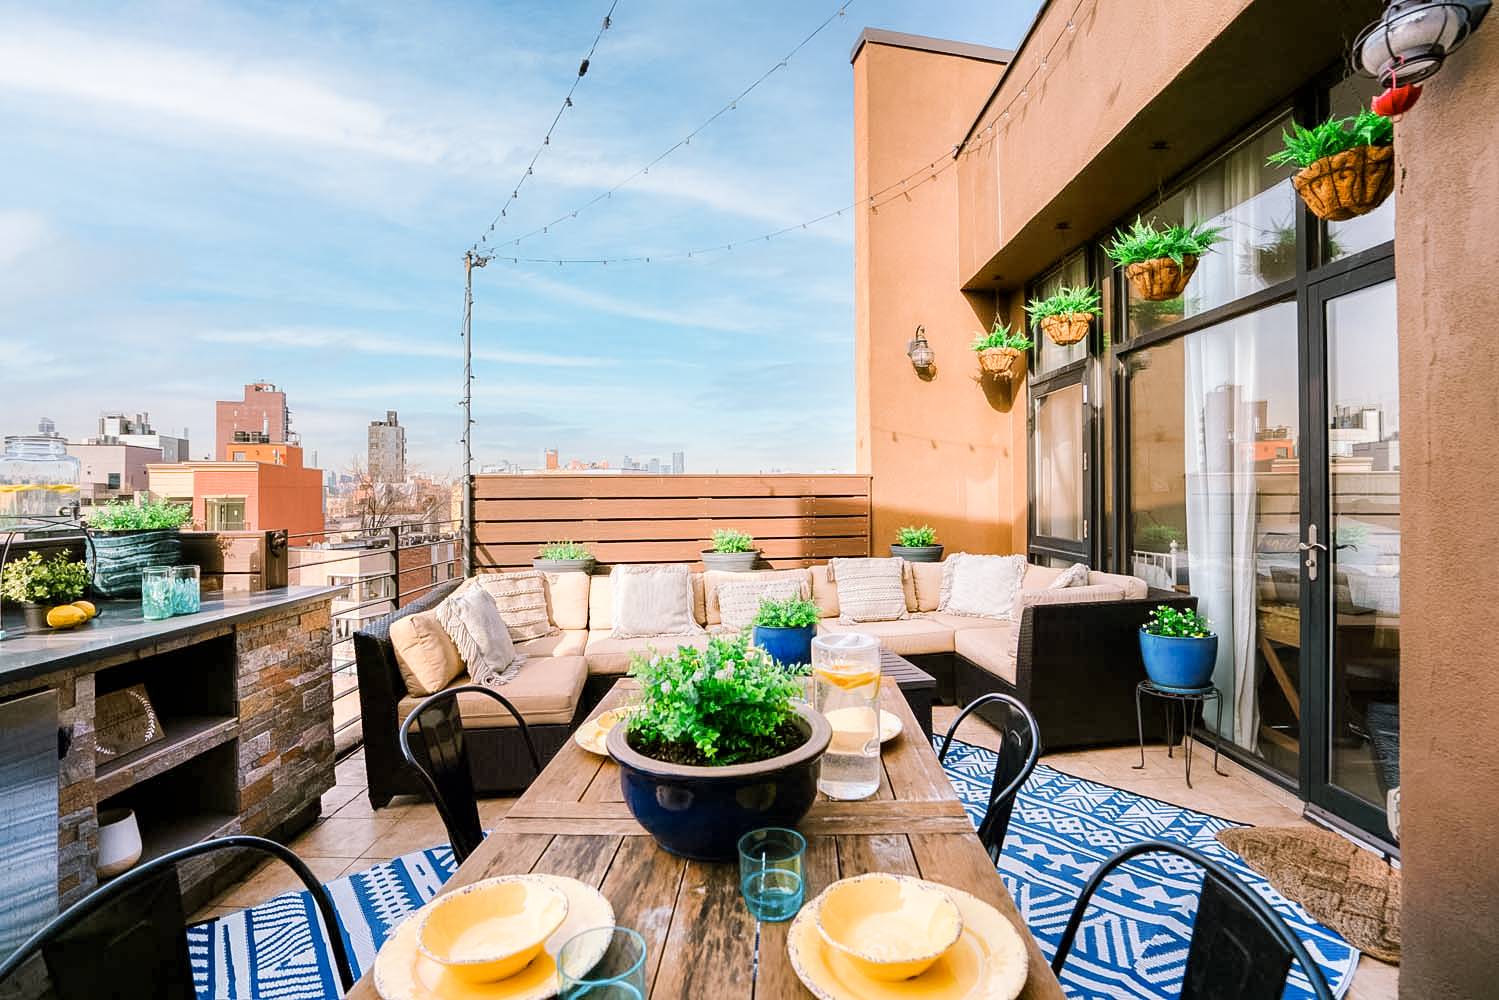 MODERN DESIGN 329sf PRIVATE ROOF TERRACE CUSTOM BUILT WET BAR DIRECT STUNNING VIEWS OF MANHATTAN 130sf STORAGE ROOMUNIT 5A 179 WOODPOINT is one of the Penthouse units, a modern 2BR ...